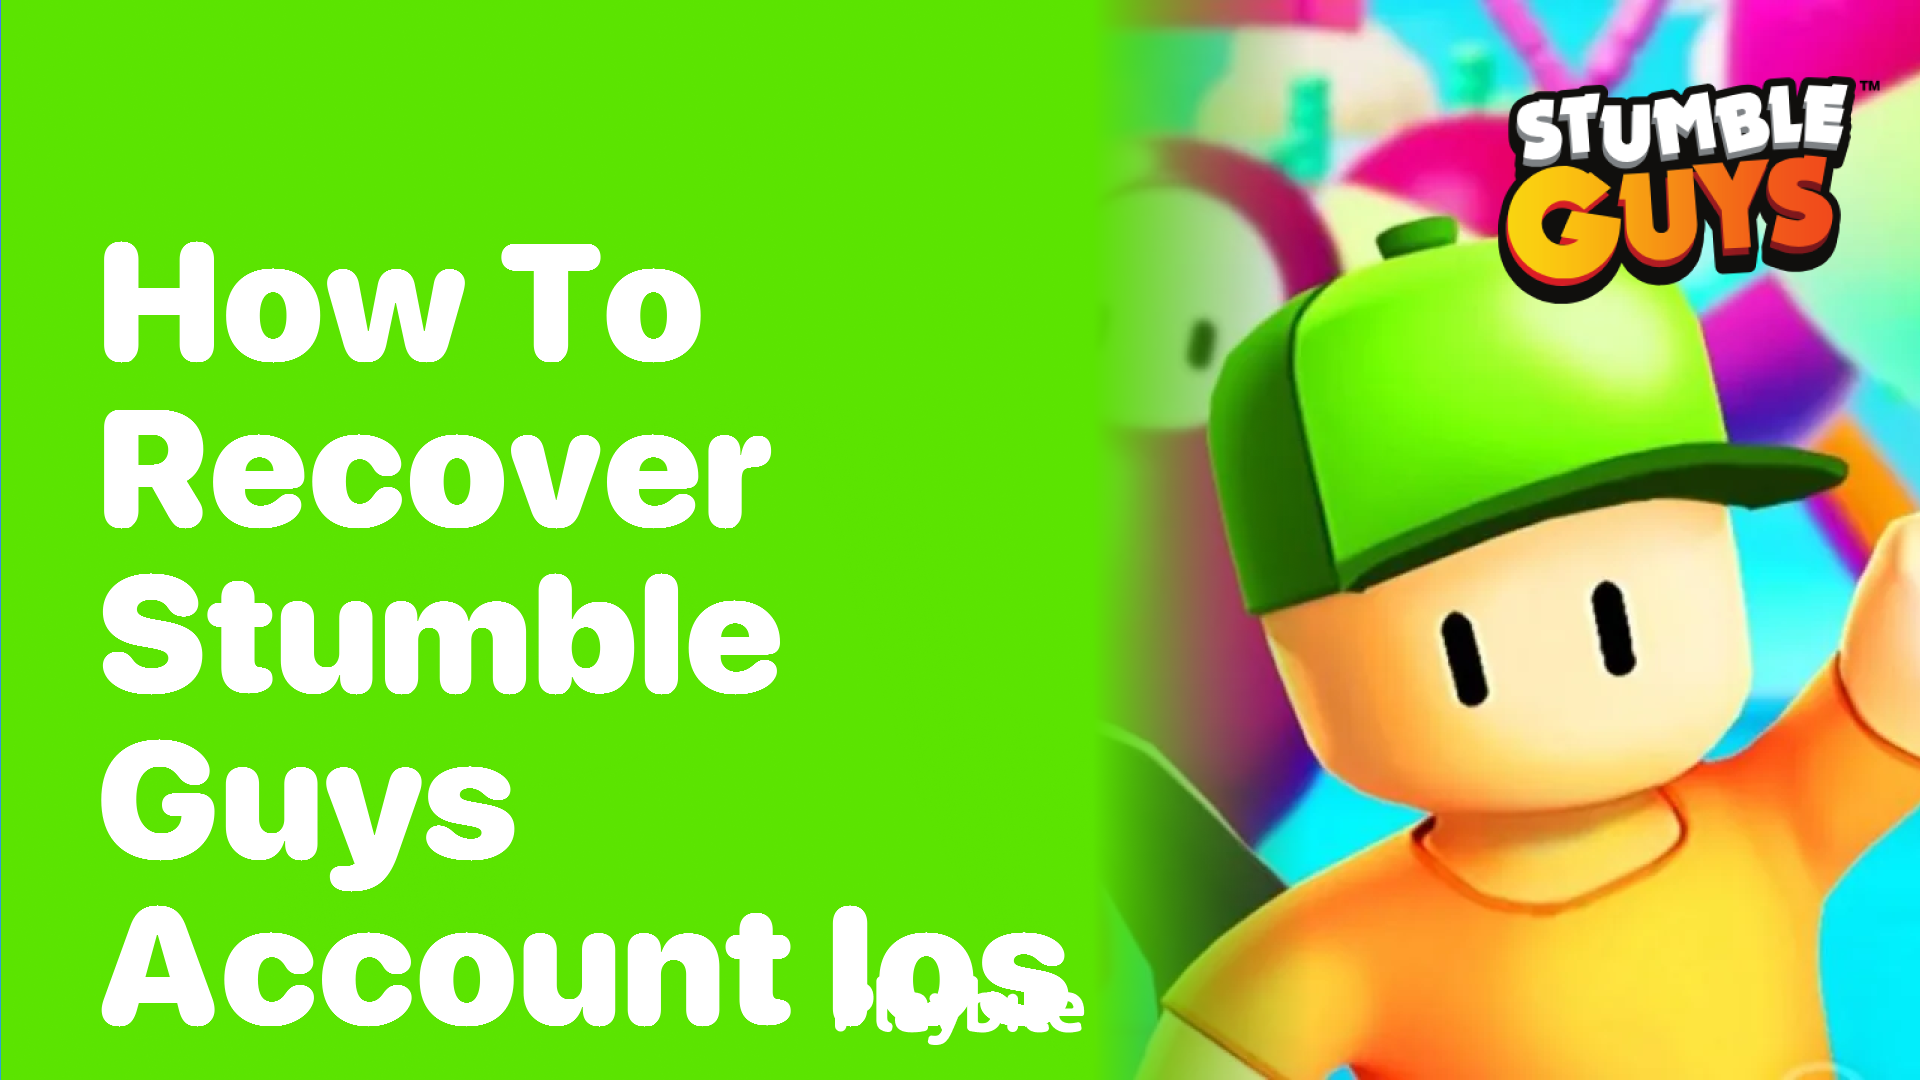 How to Recover Your Stumble Guys Account on iOS